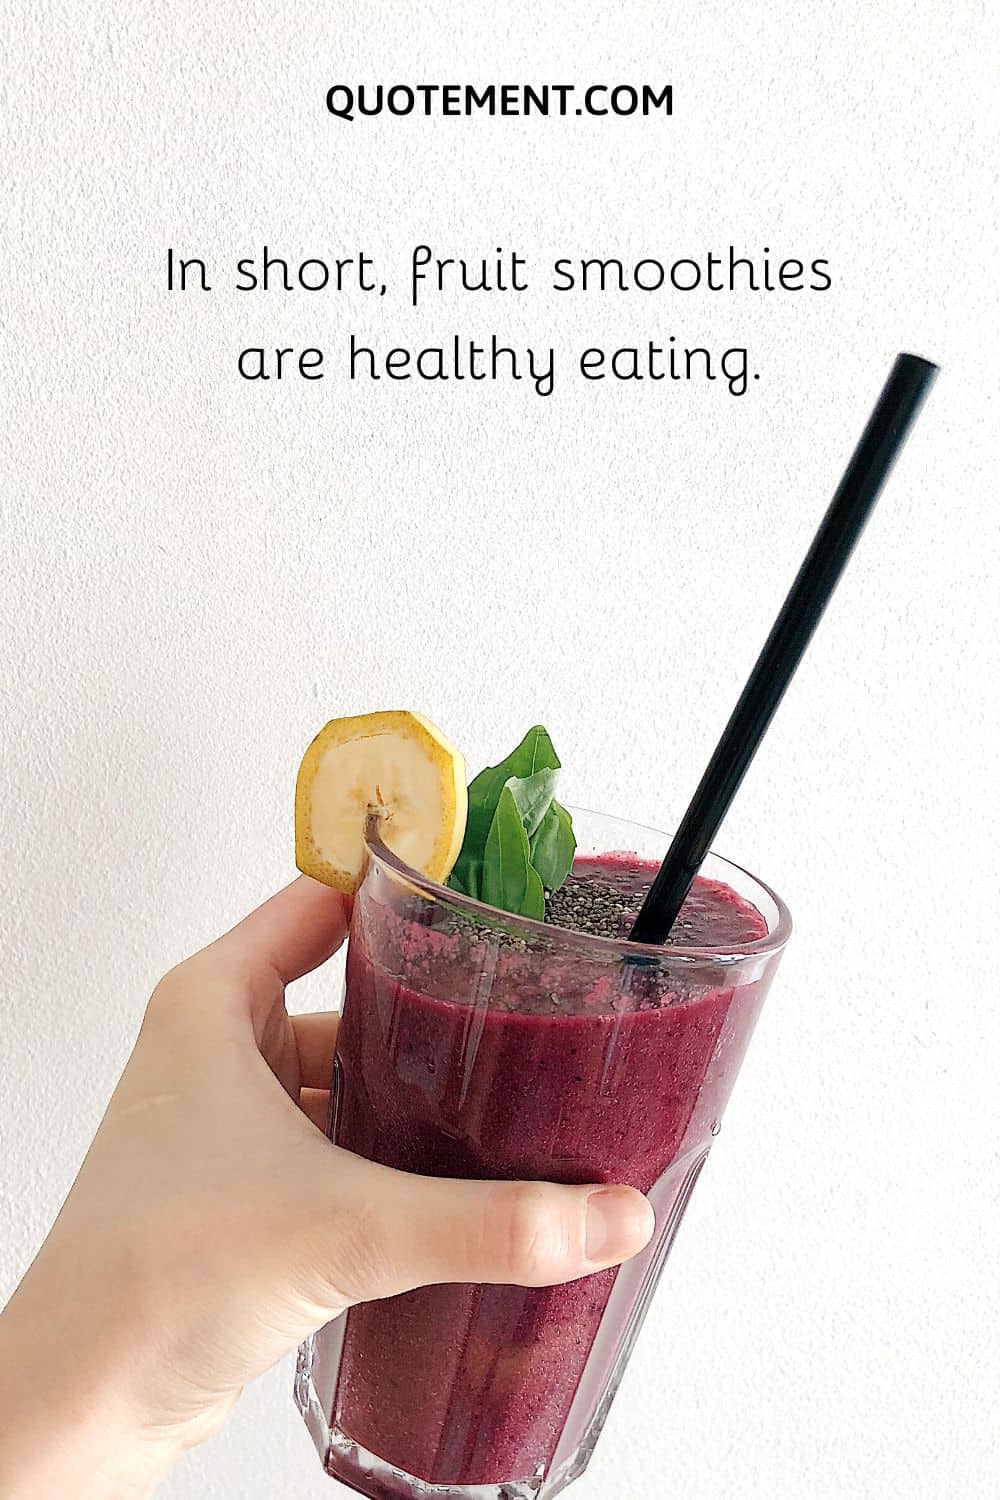 In short, fruit smoothies are healthy eating.